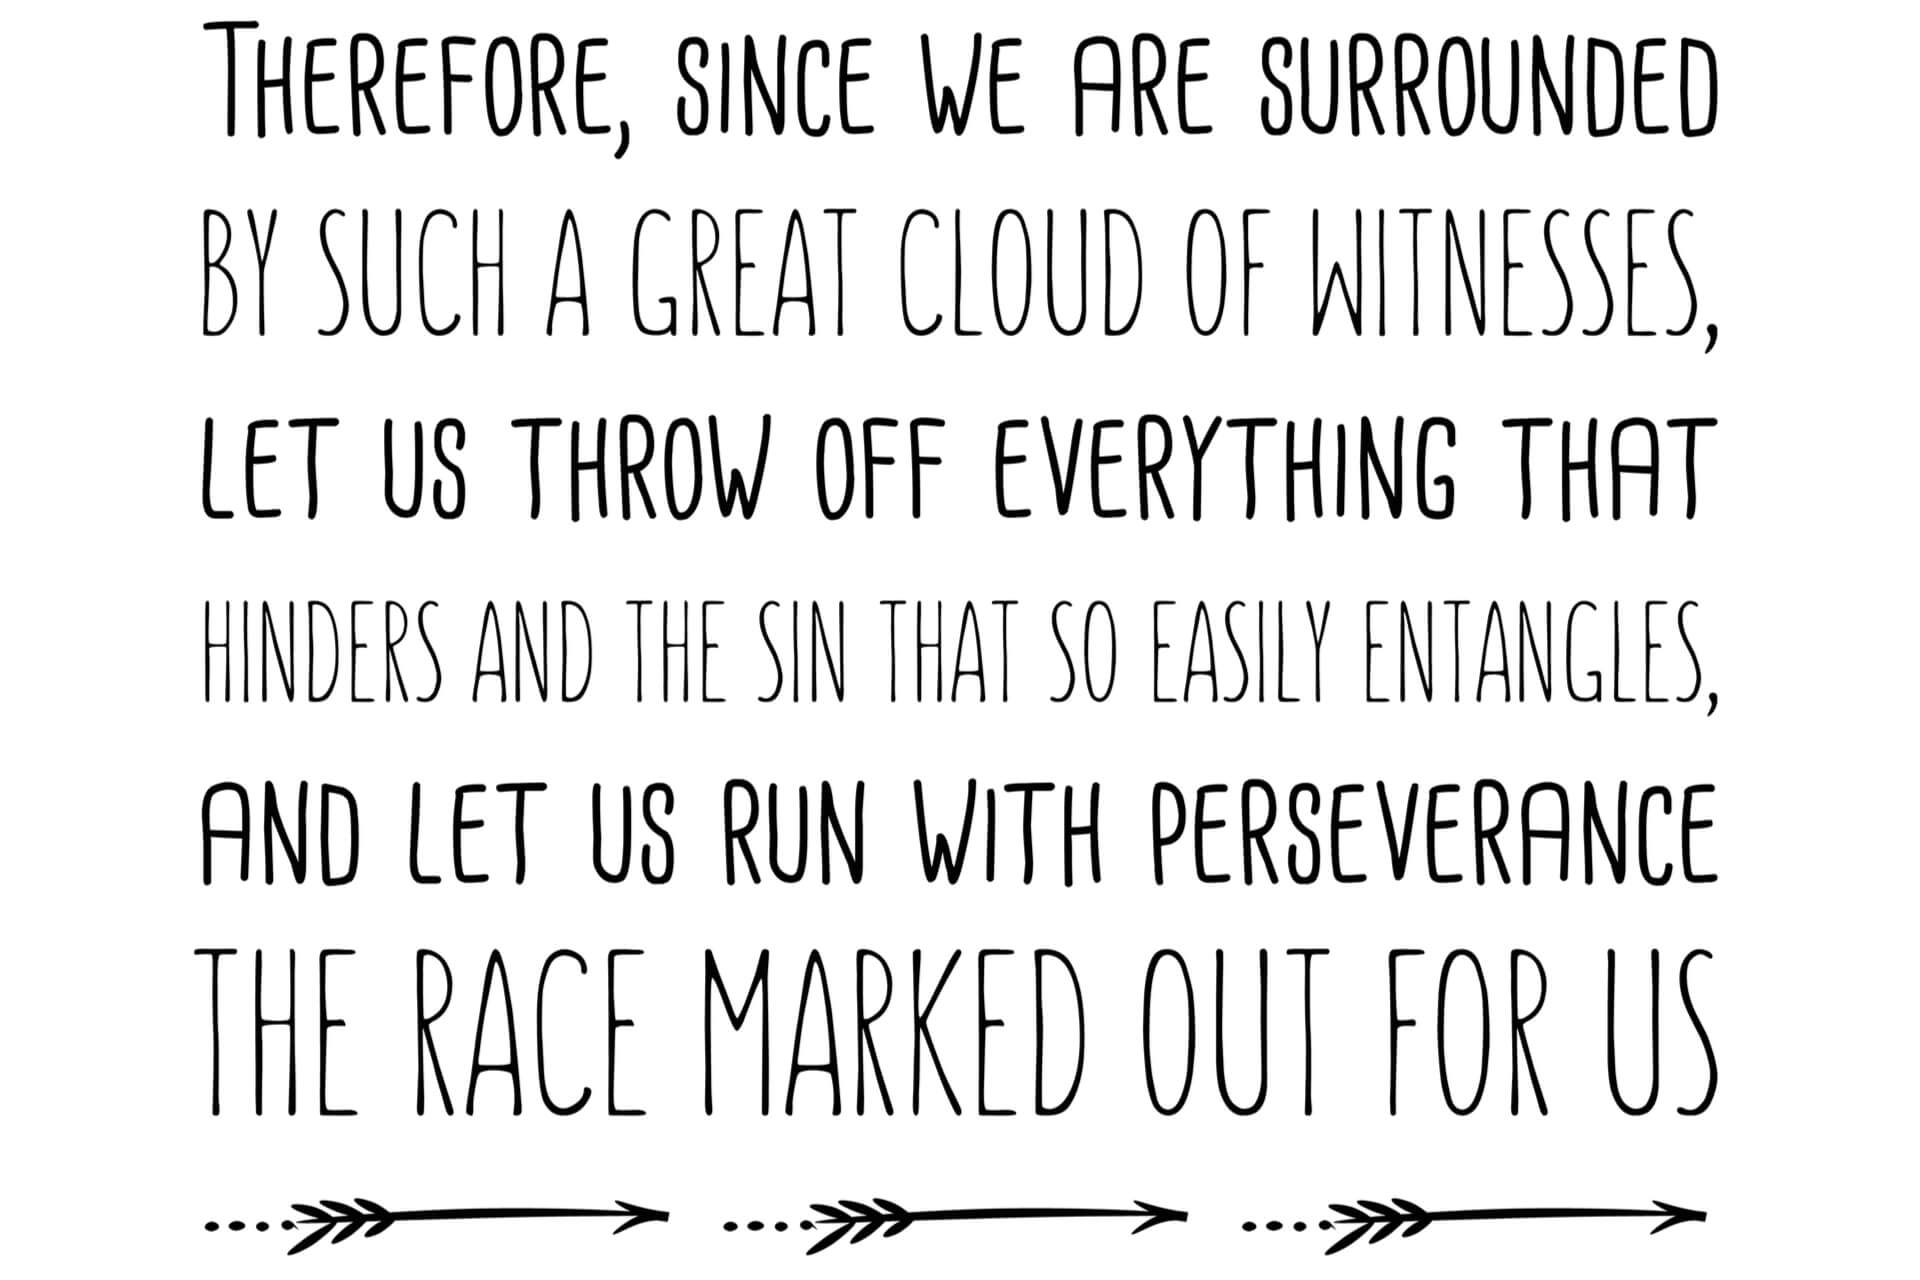 Therefore, since we are surrounded by such a great cloud of witnesses